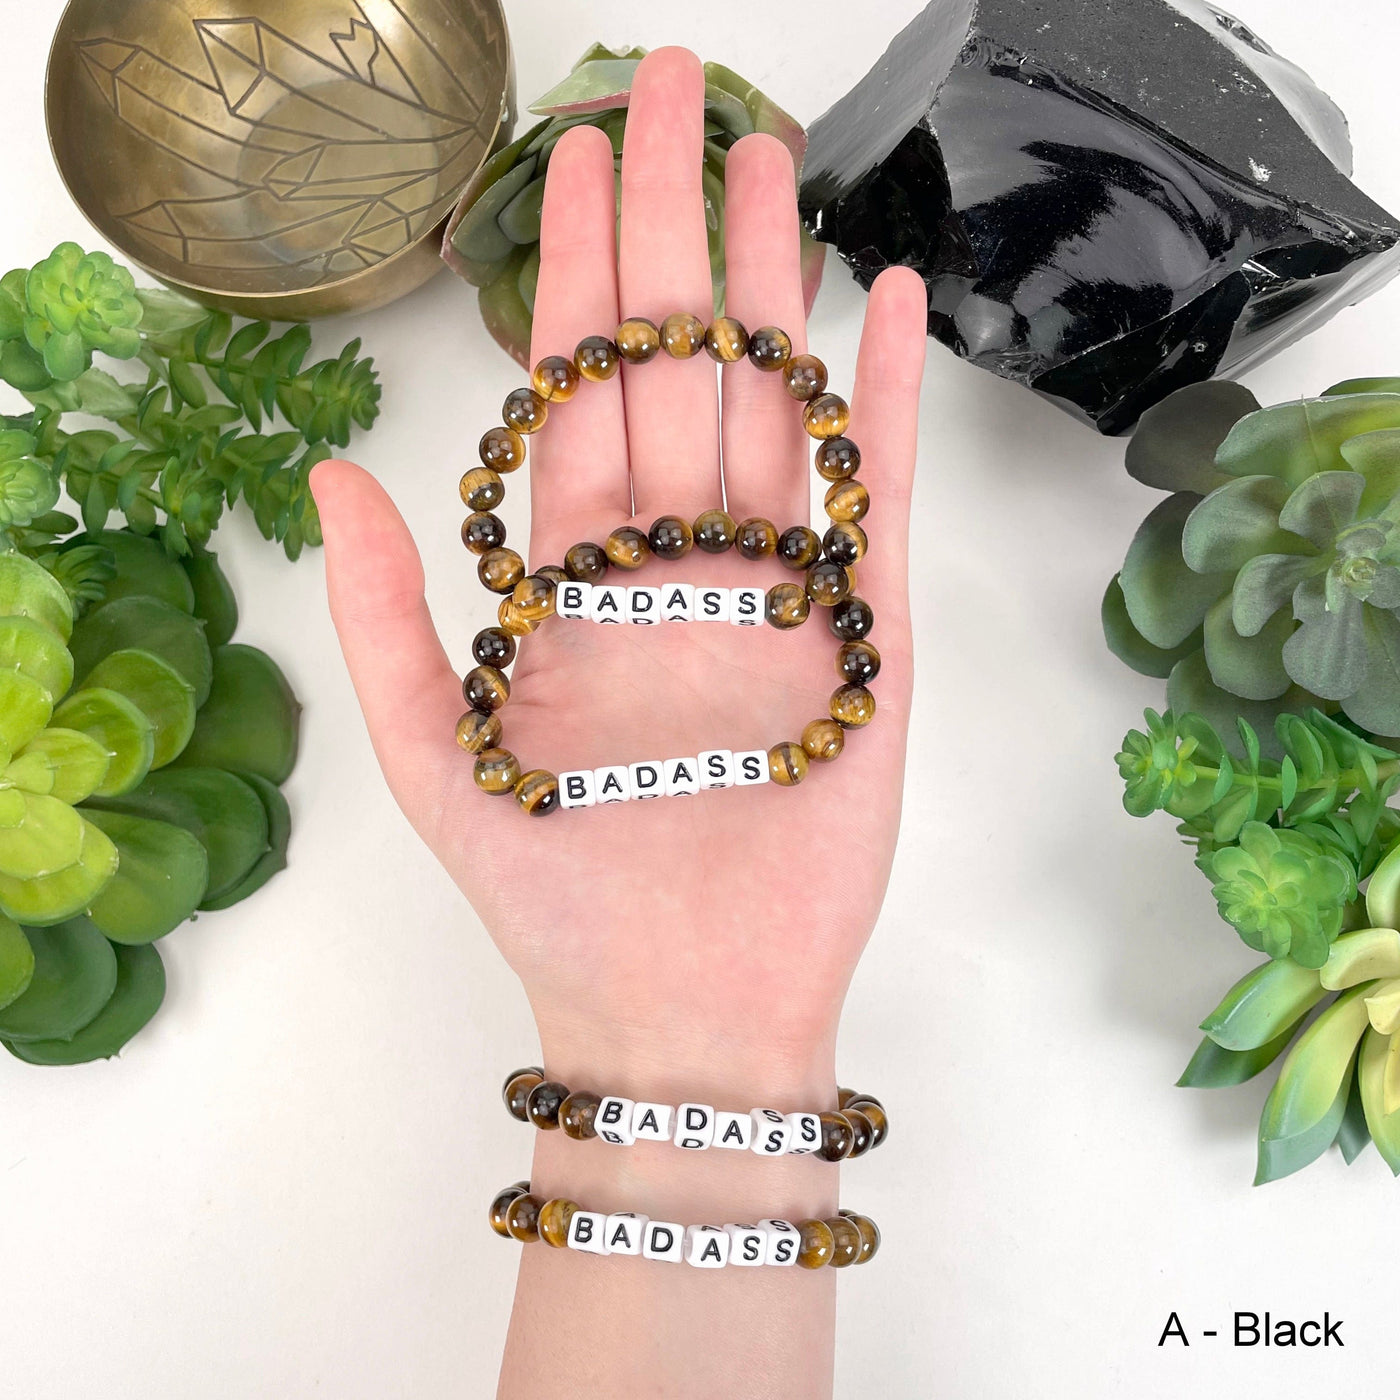 black "BADASS" letter bead option in hand and on wrist for color reference